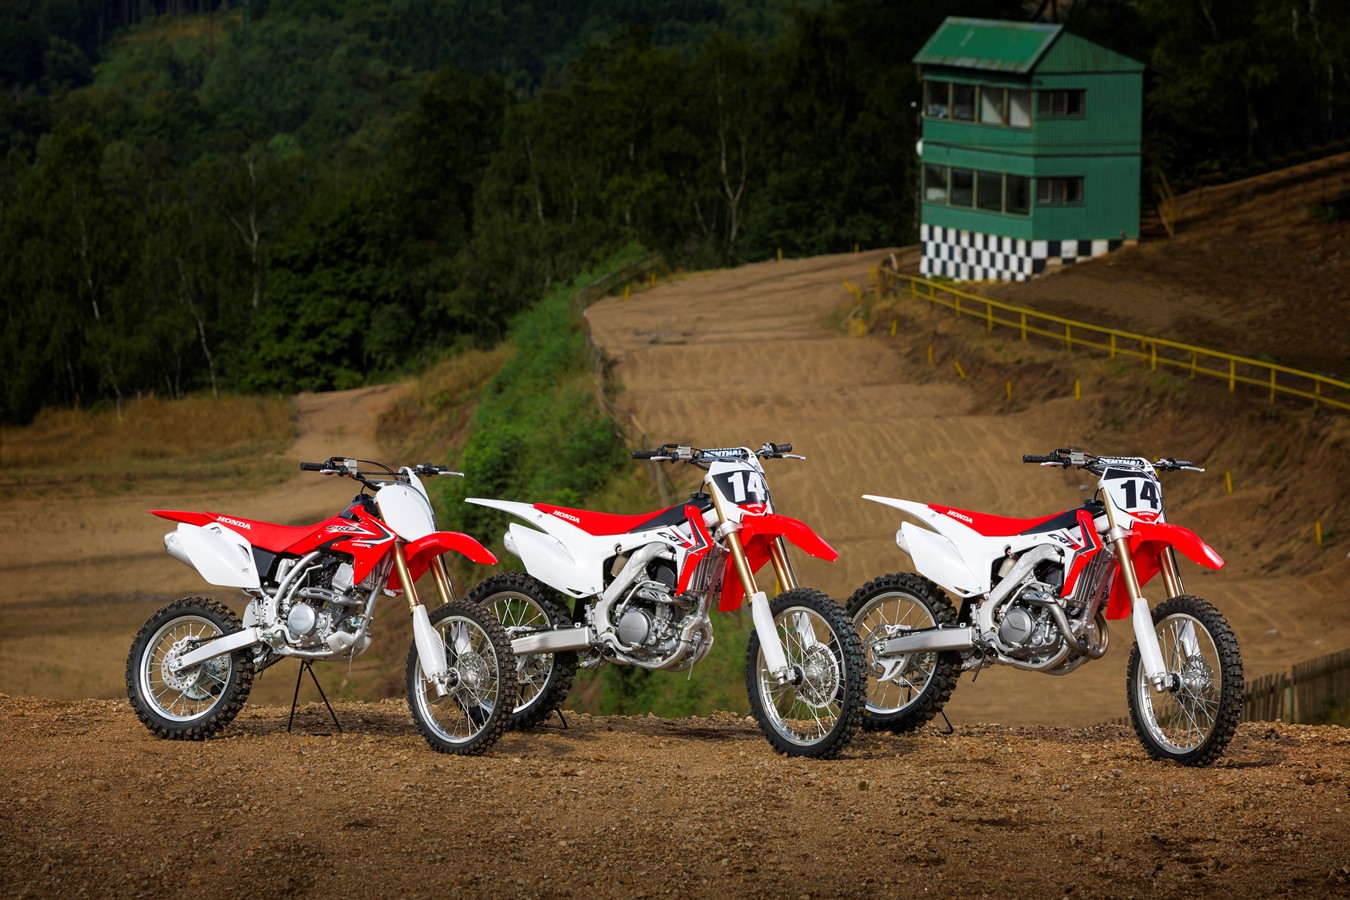 CRF450R, CRF250R and CRF150R